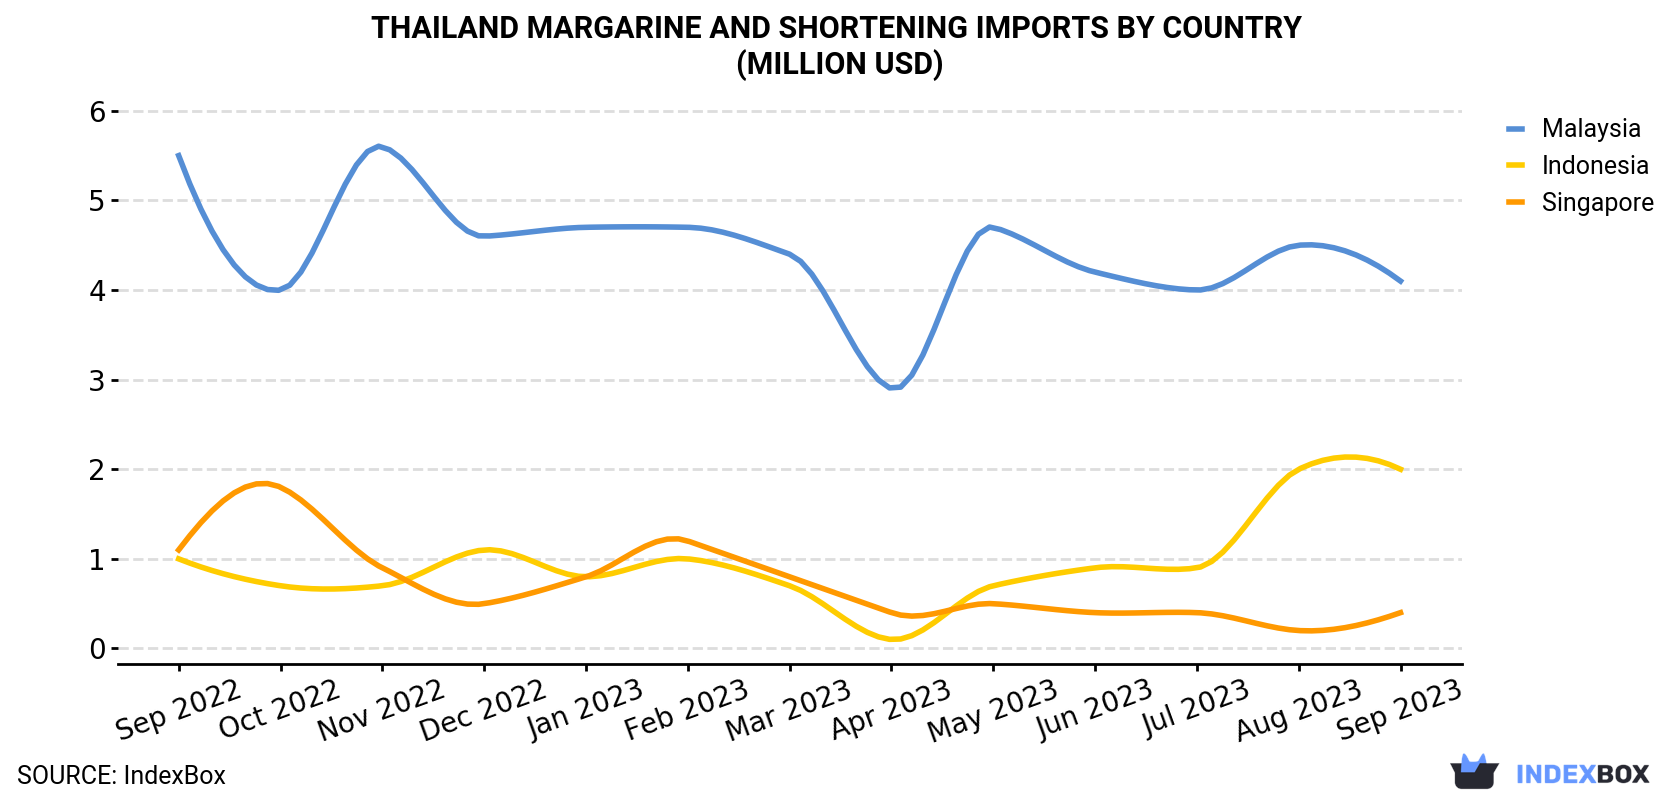 Thailand Margarine And Shortening Imports By Country (Million USD)